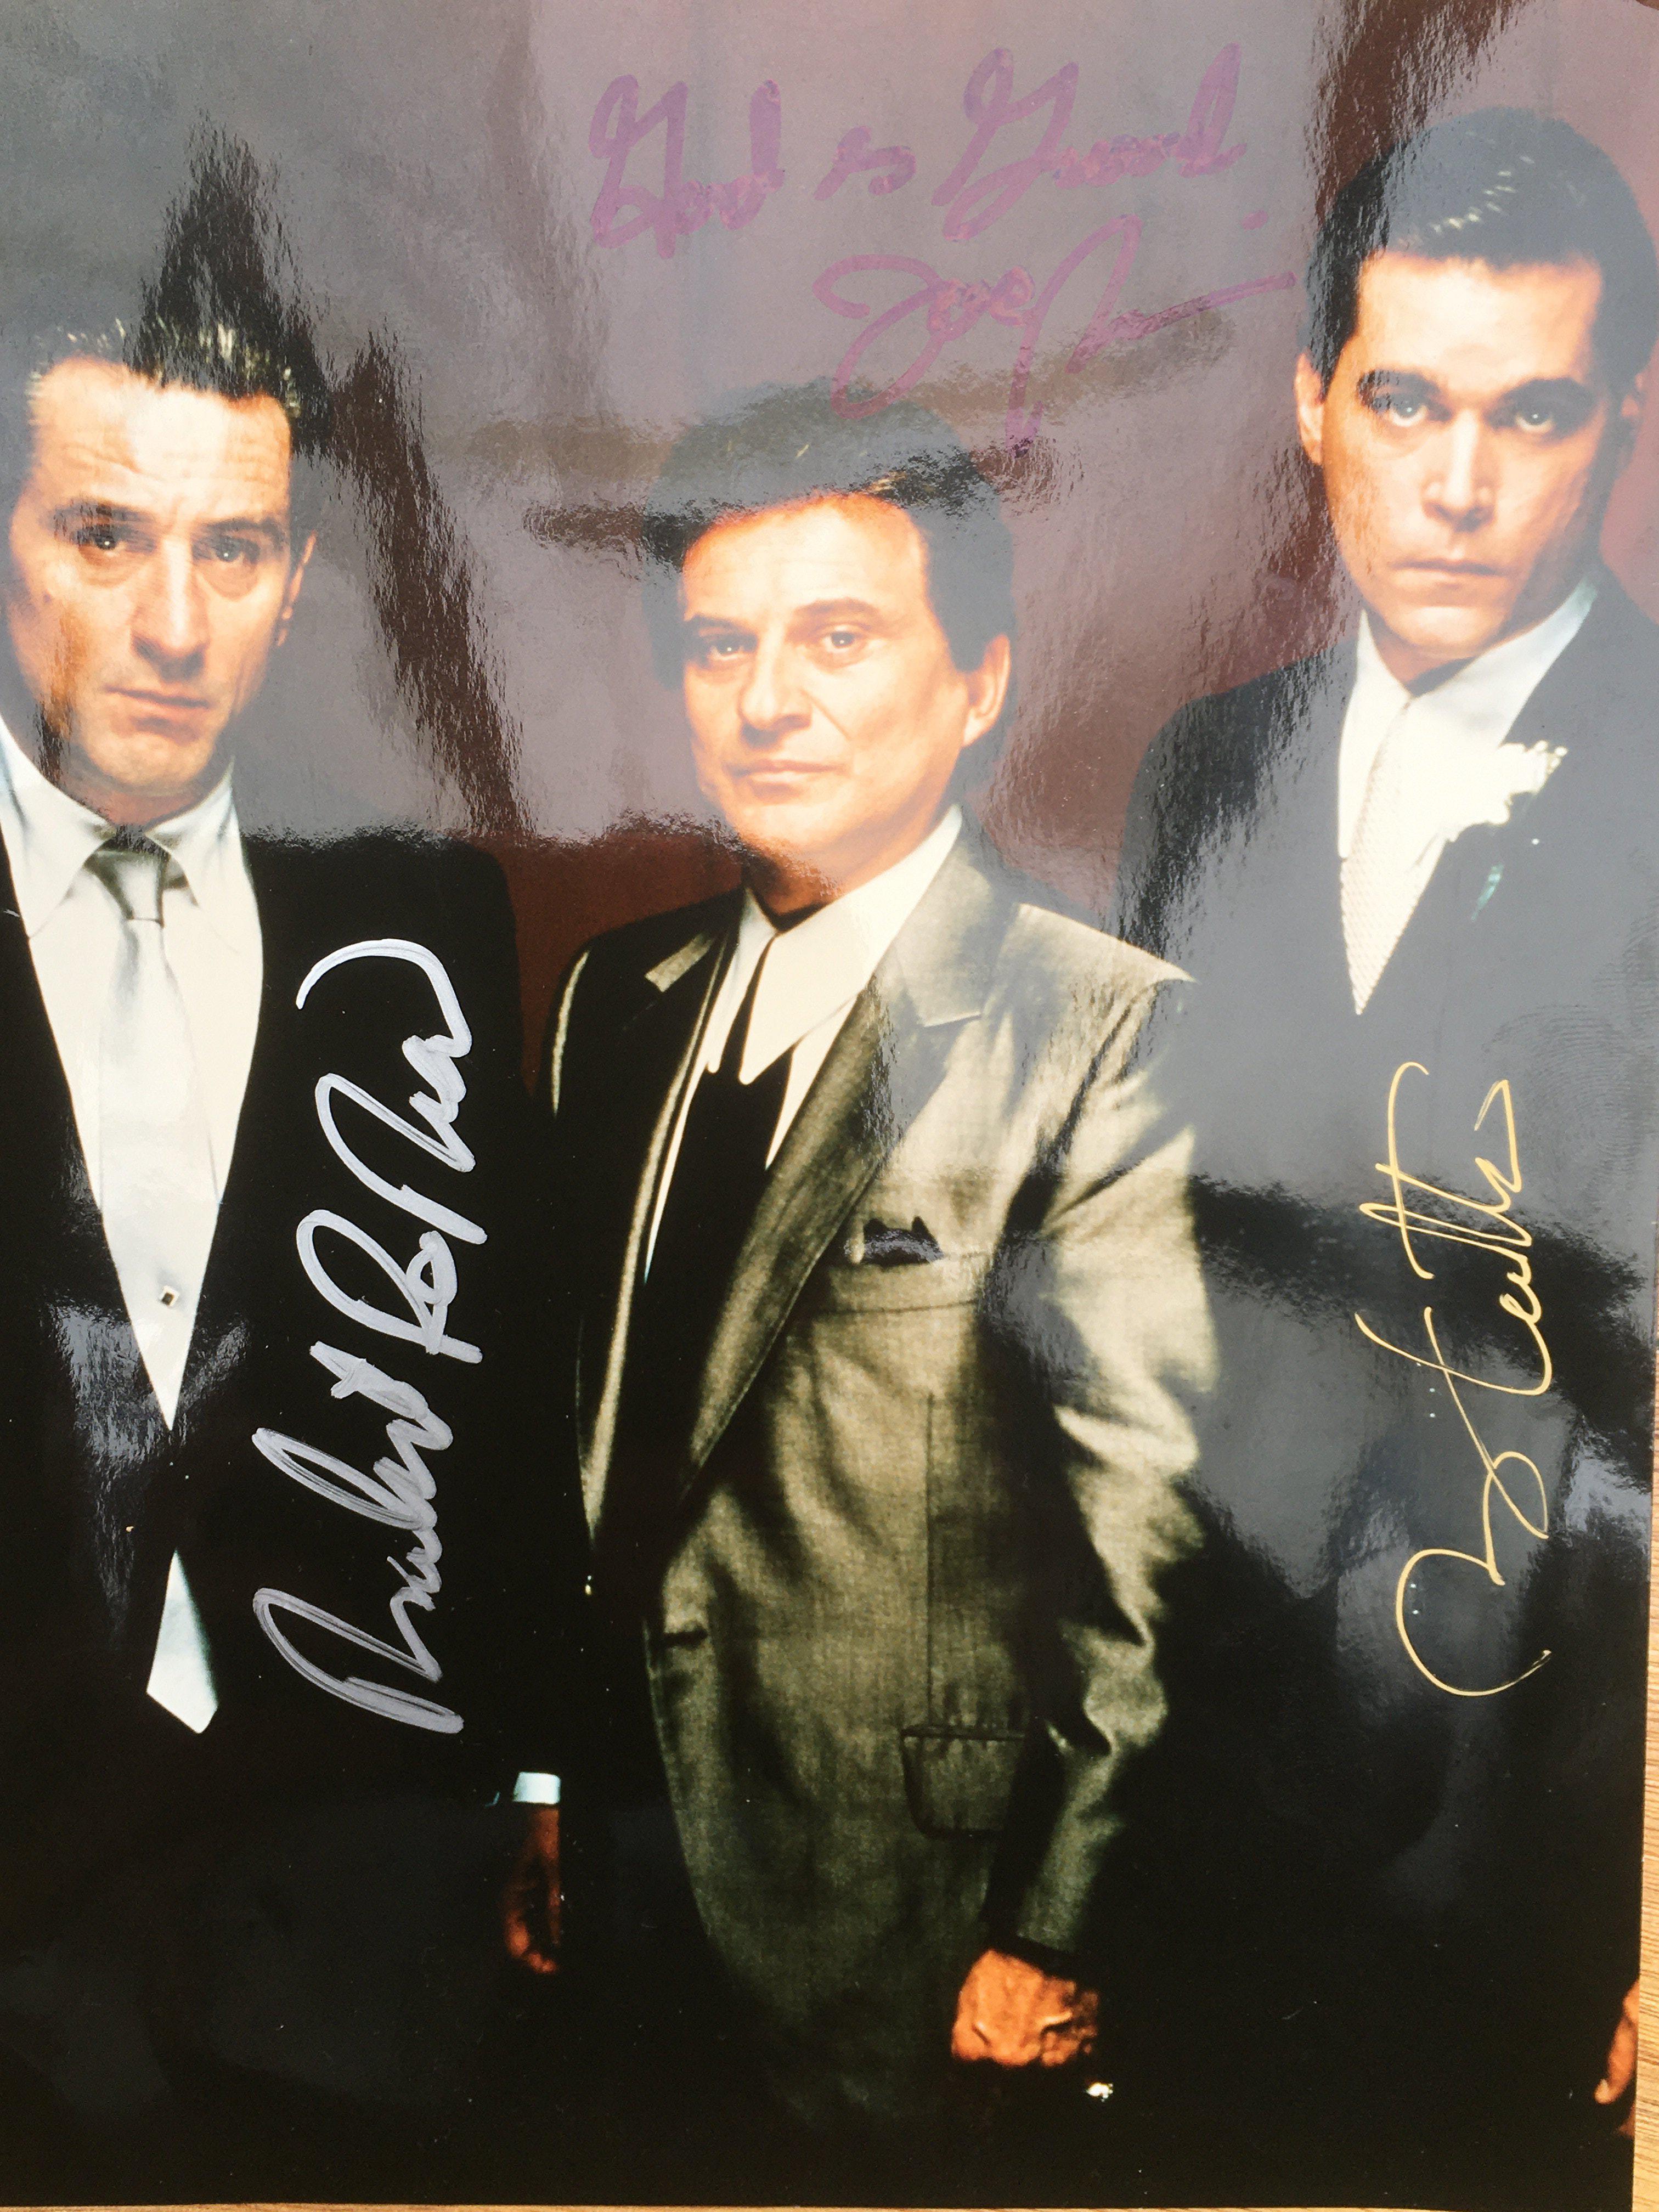 A signed photographic print of the three main characters from 'Goodfellas', signed by Robert De